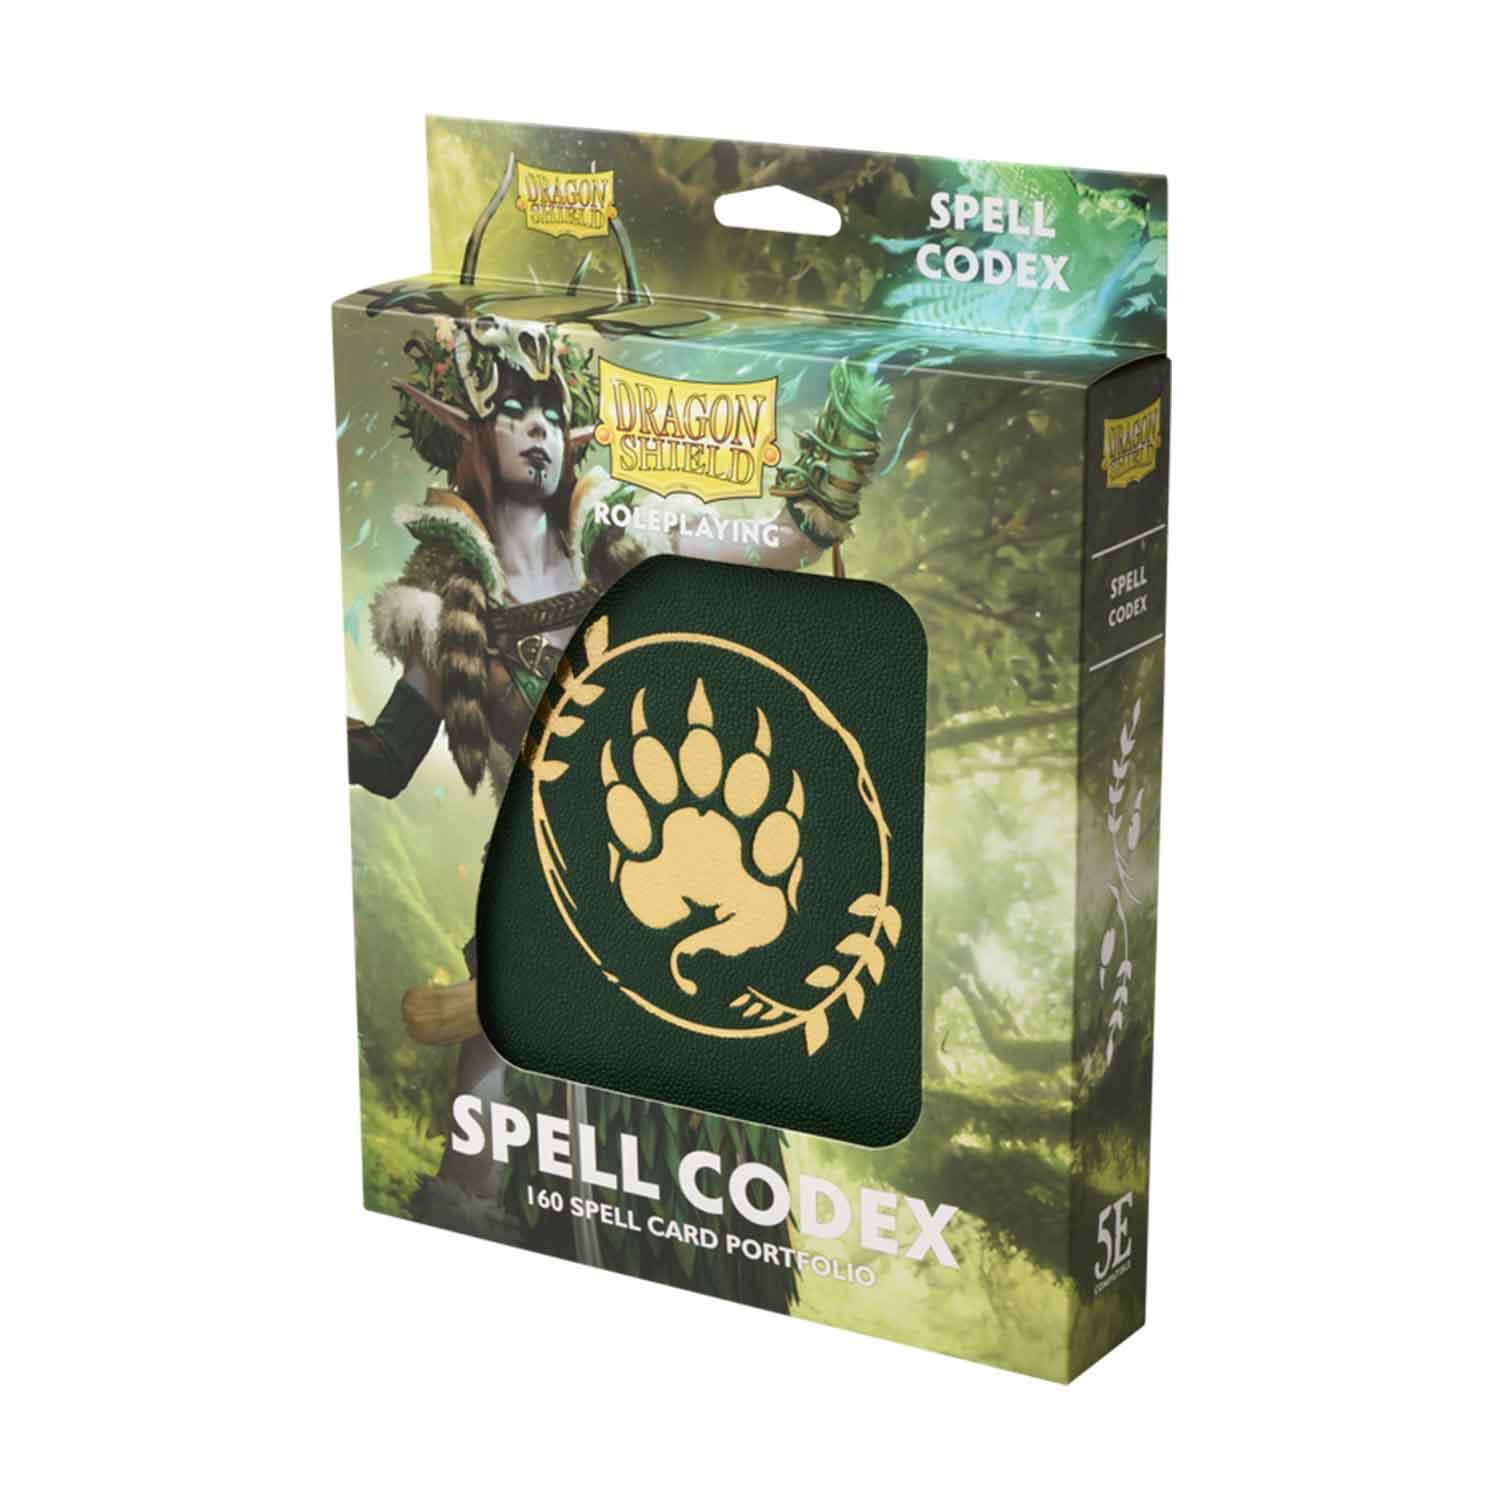 Spell Codex - Forest Green Box